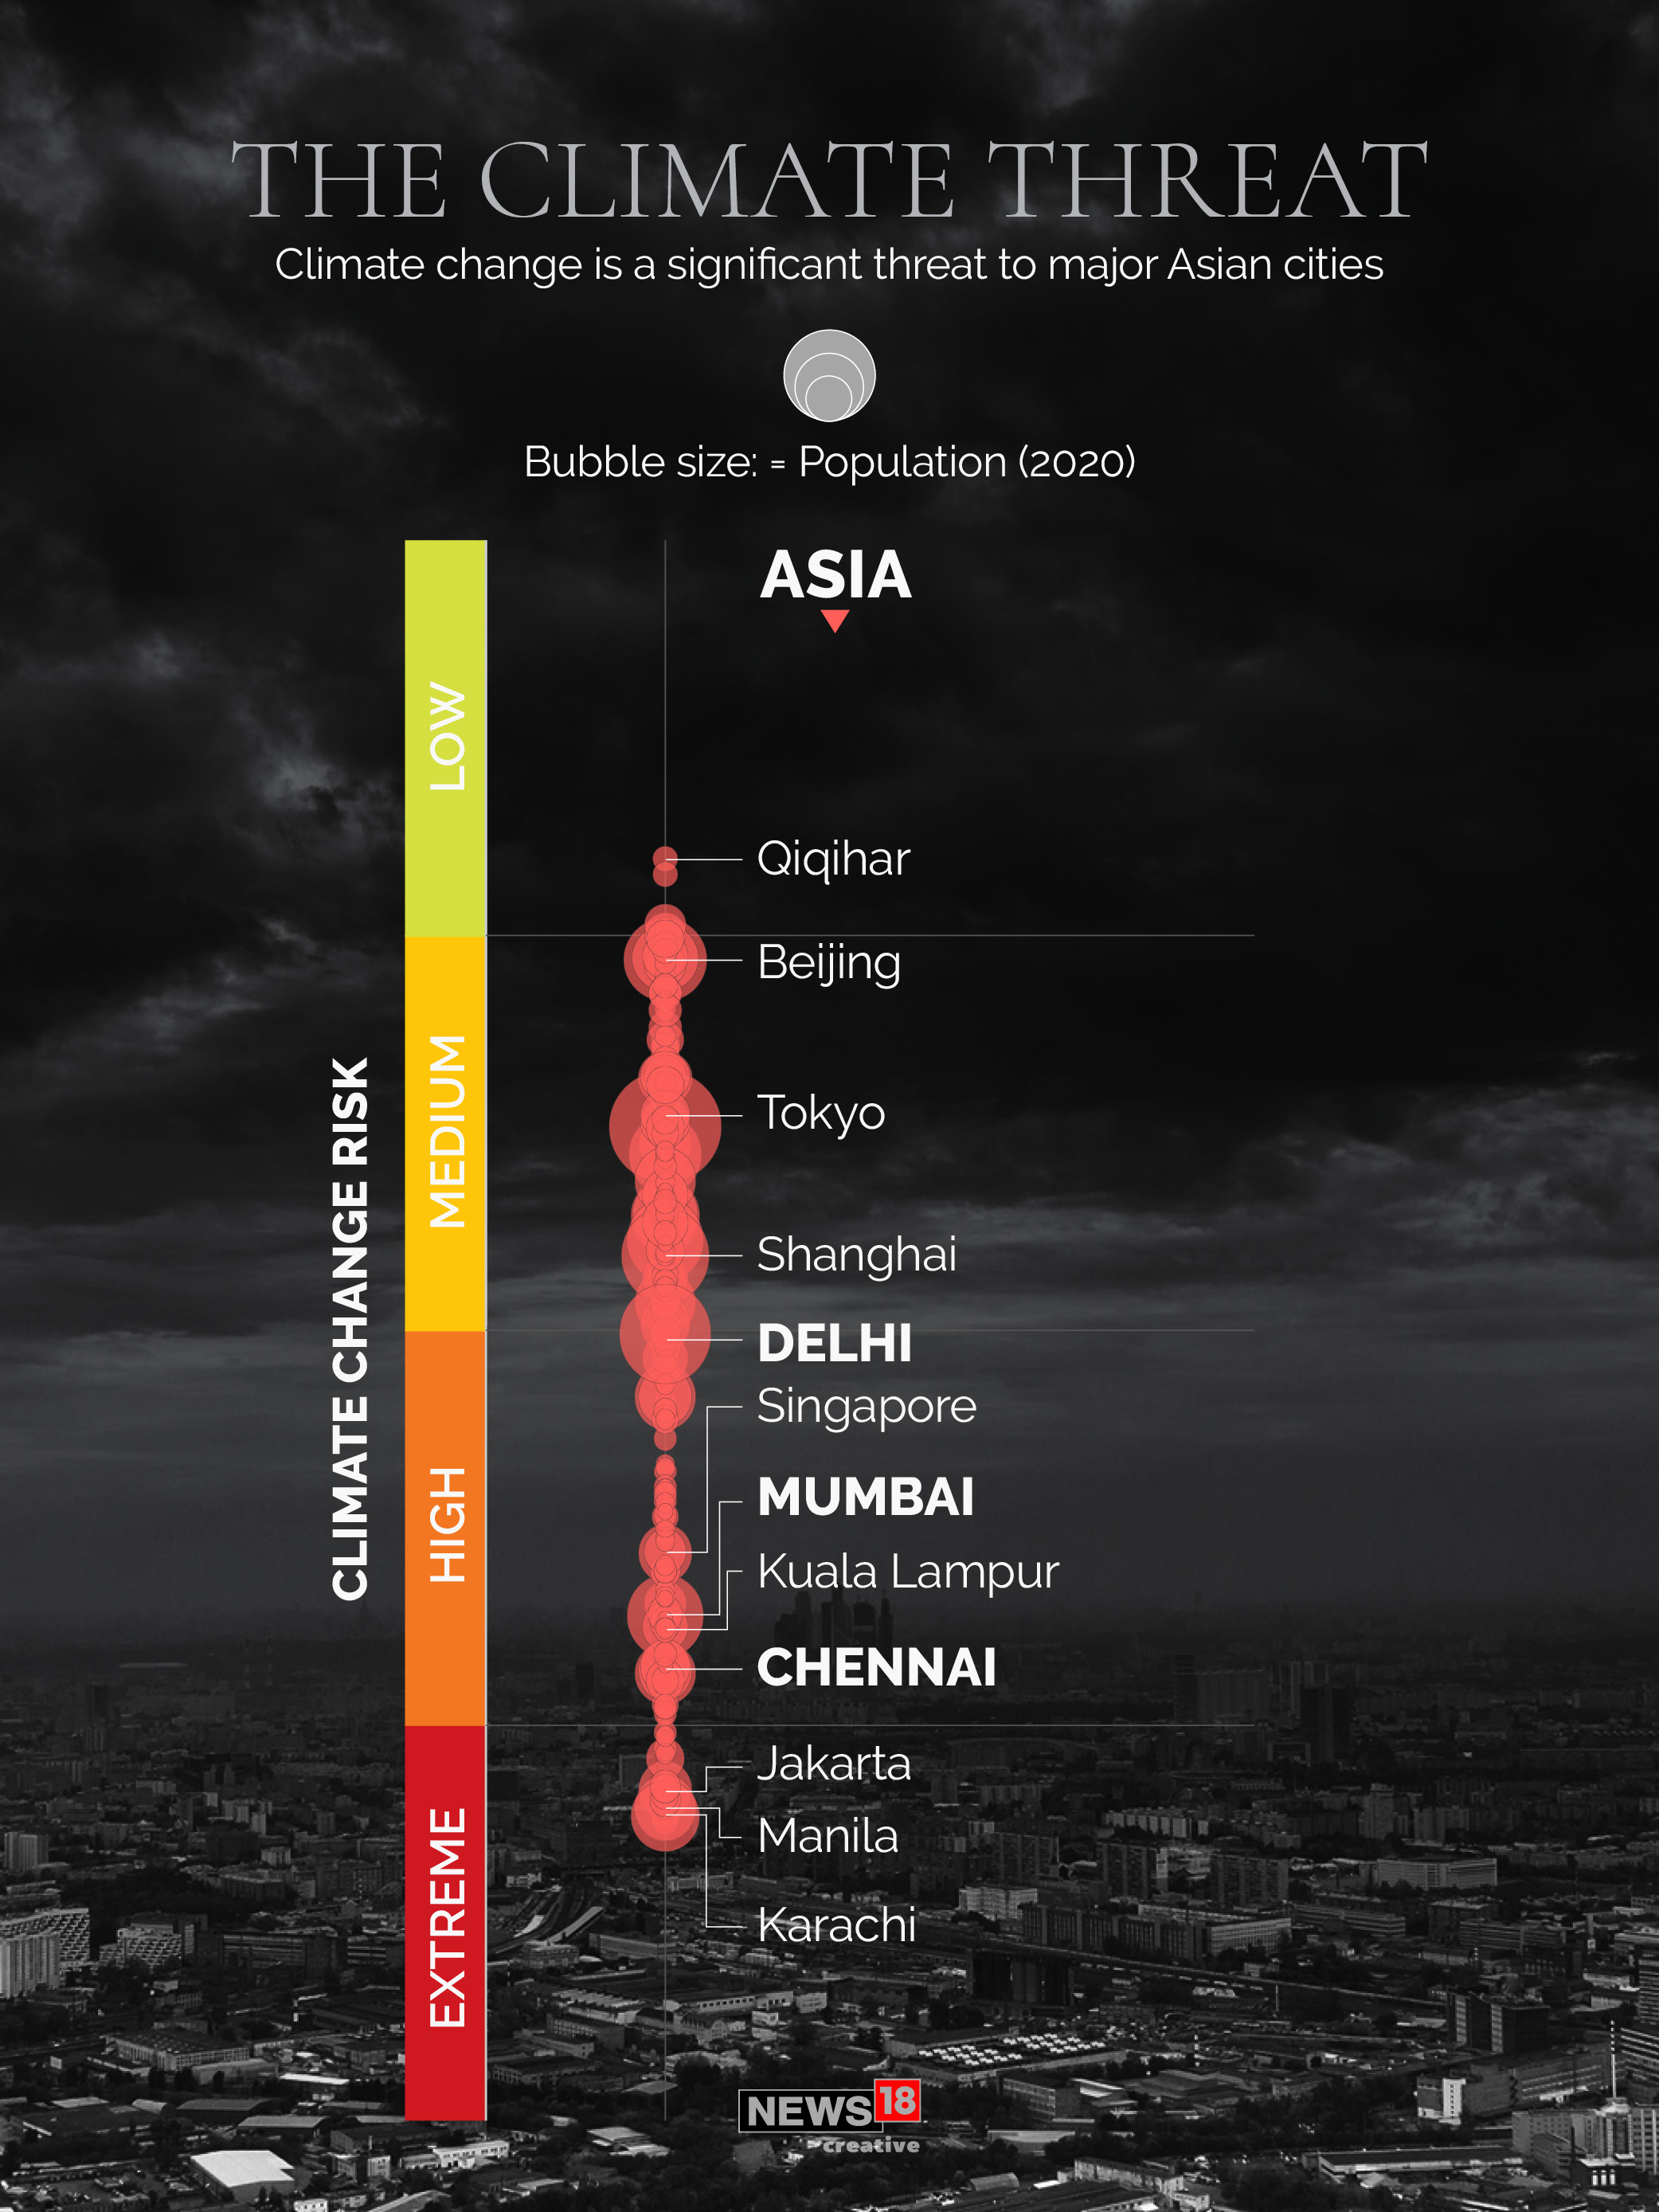 99 out of 100 of the world's most climate vulnerable cities are in Asia